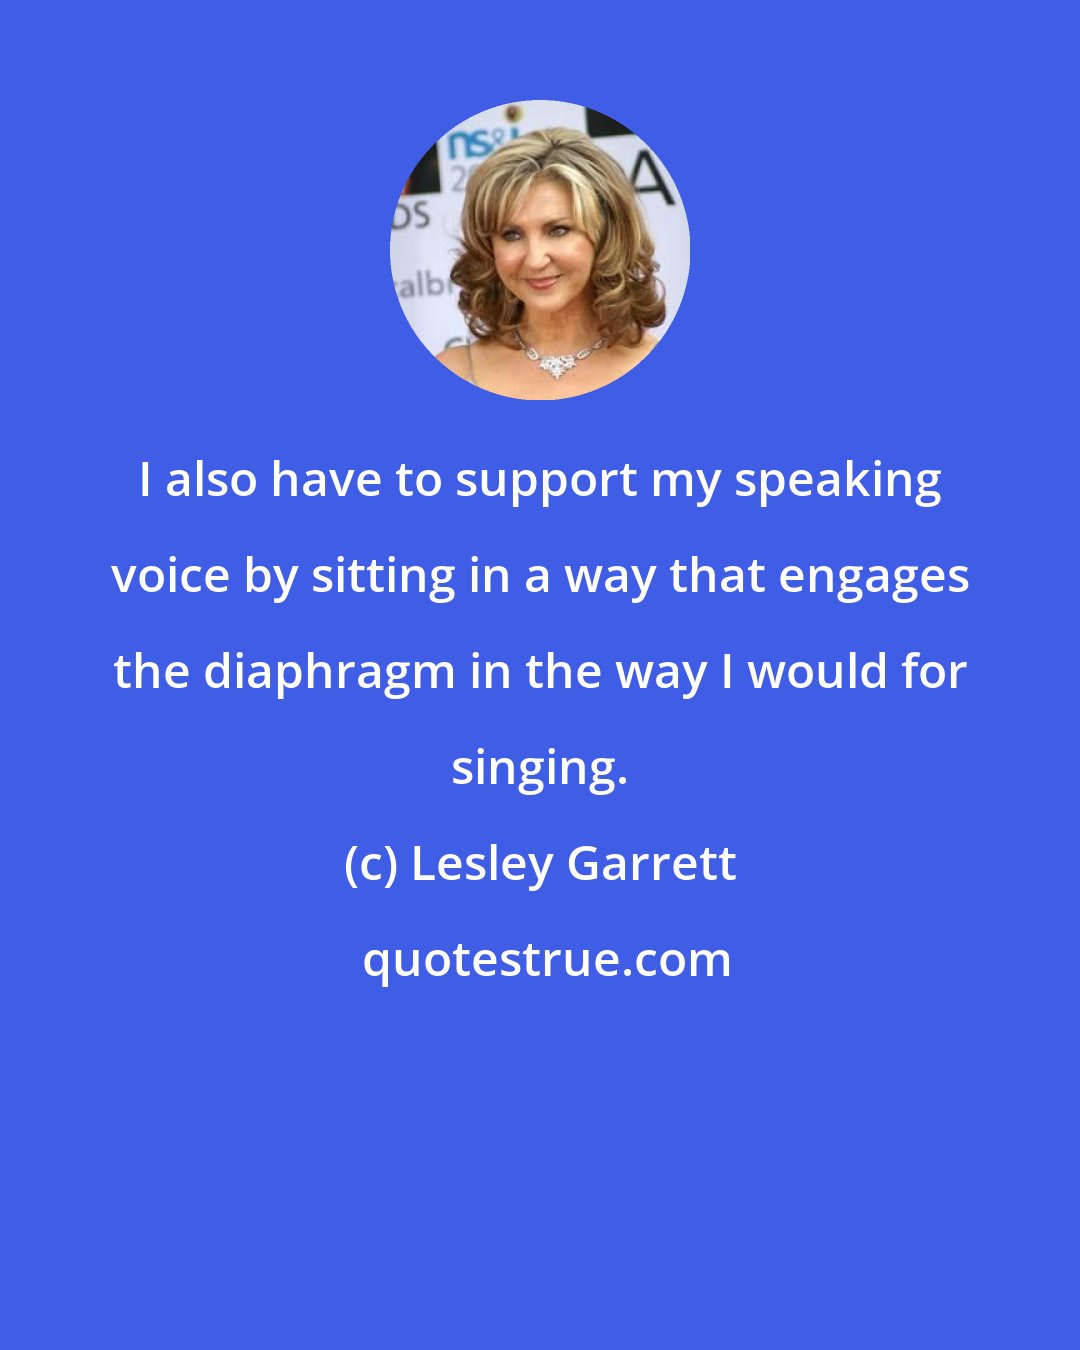 Lesley Garrett: I also have to support my speaking voice by sitting in a way that engages the diaphragm in the way I would for singing.